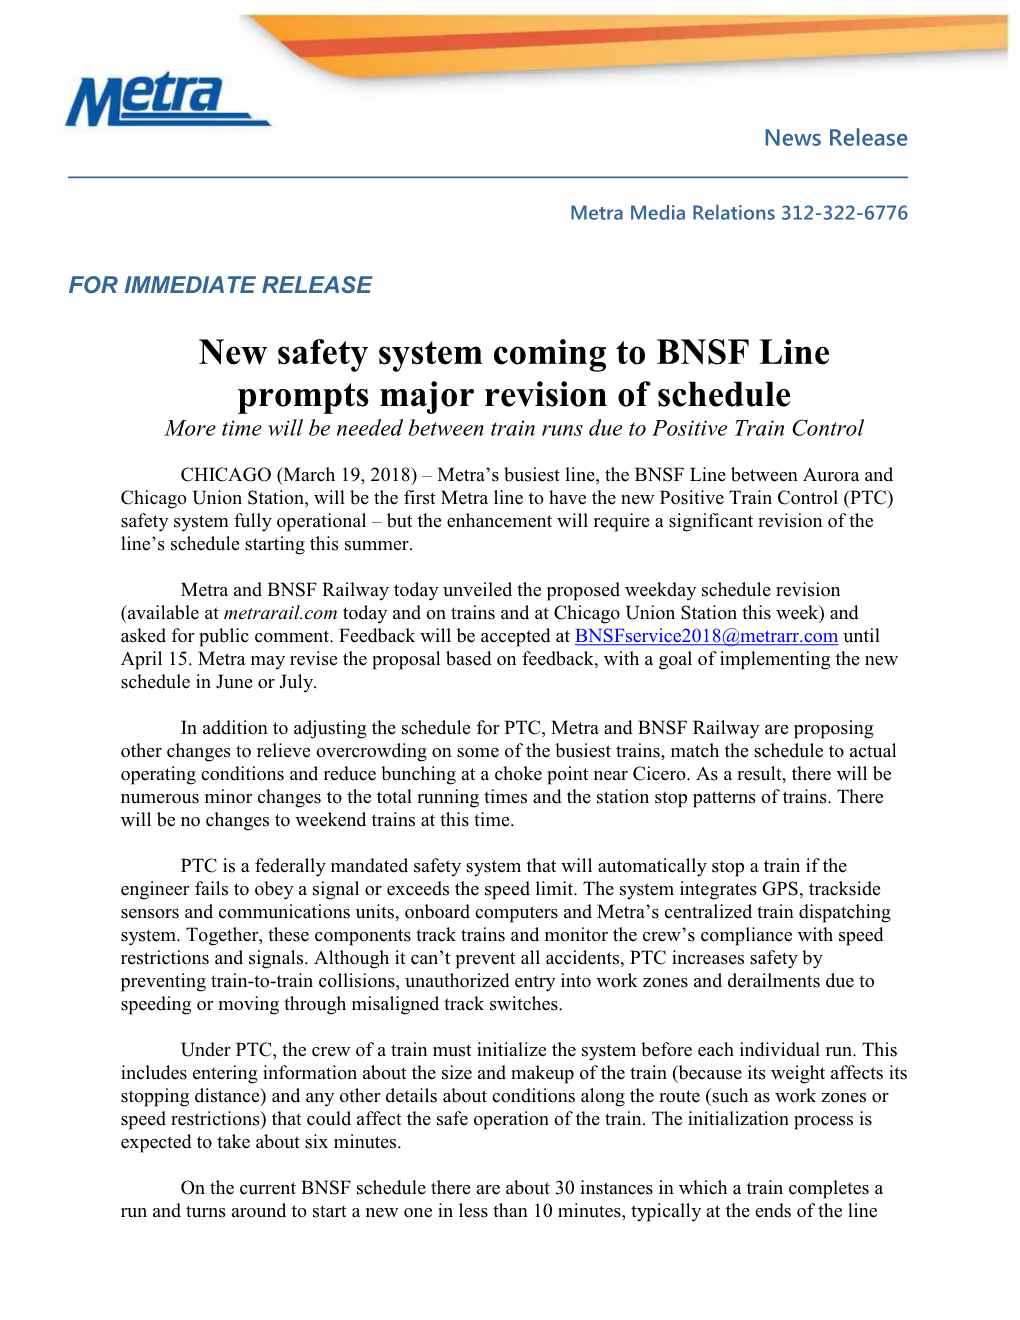 New Safety System Coming to BNSF Line Prompts Major Revision of Schedule More Time Will Be Needed Between Train Runs Due to Positive Train Control